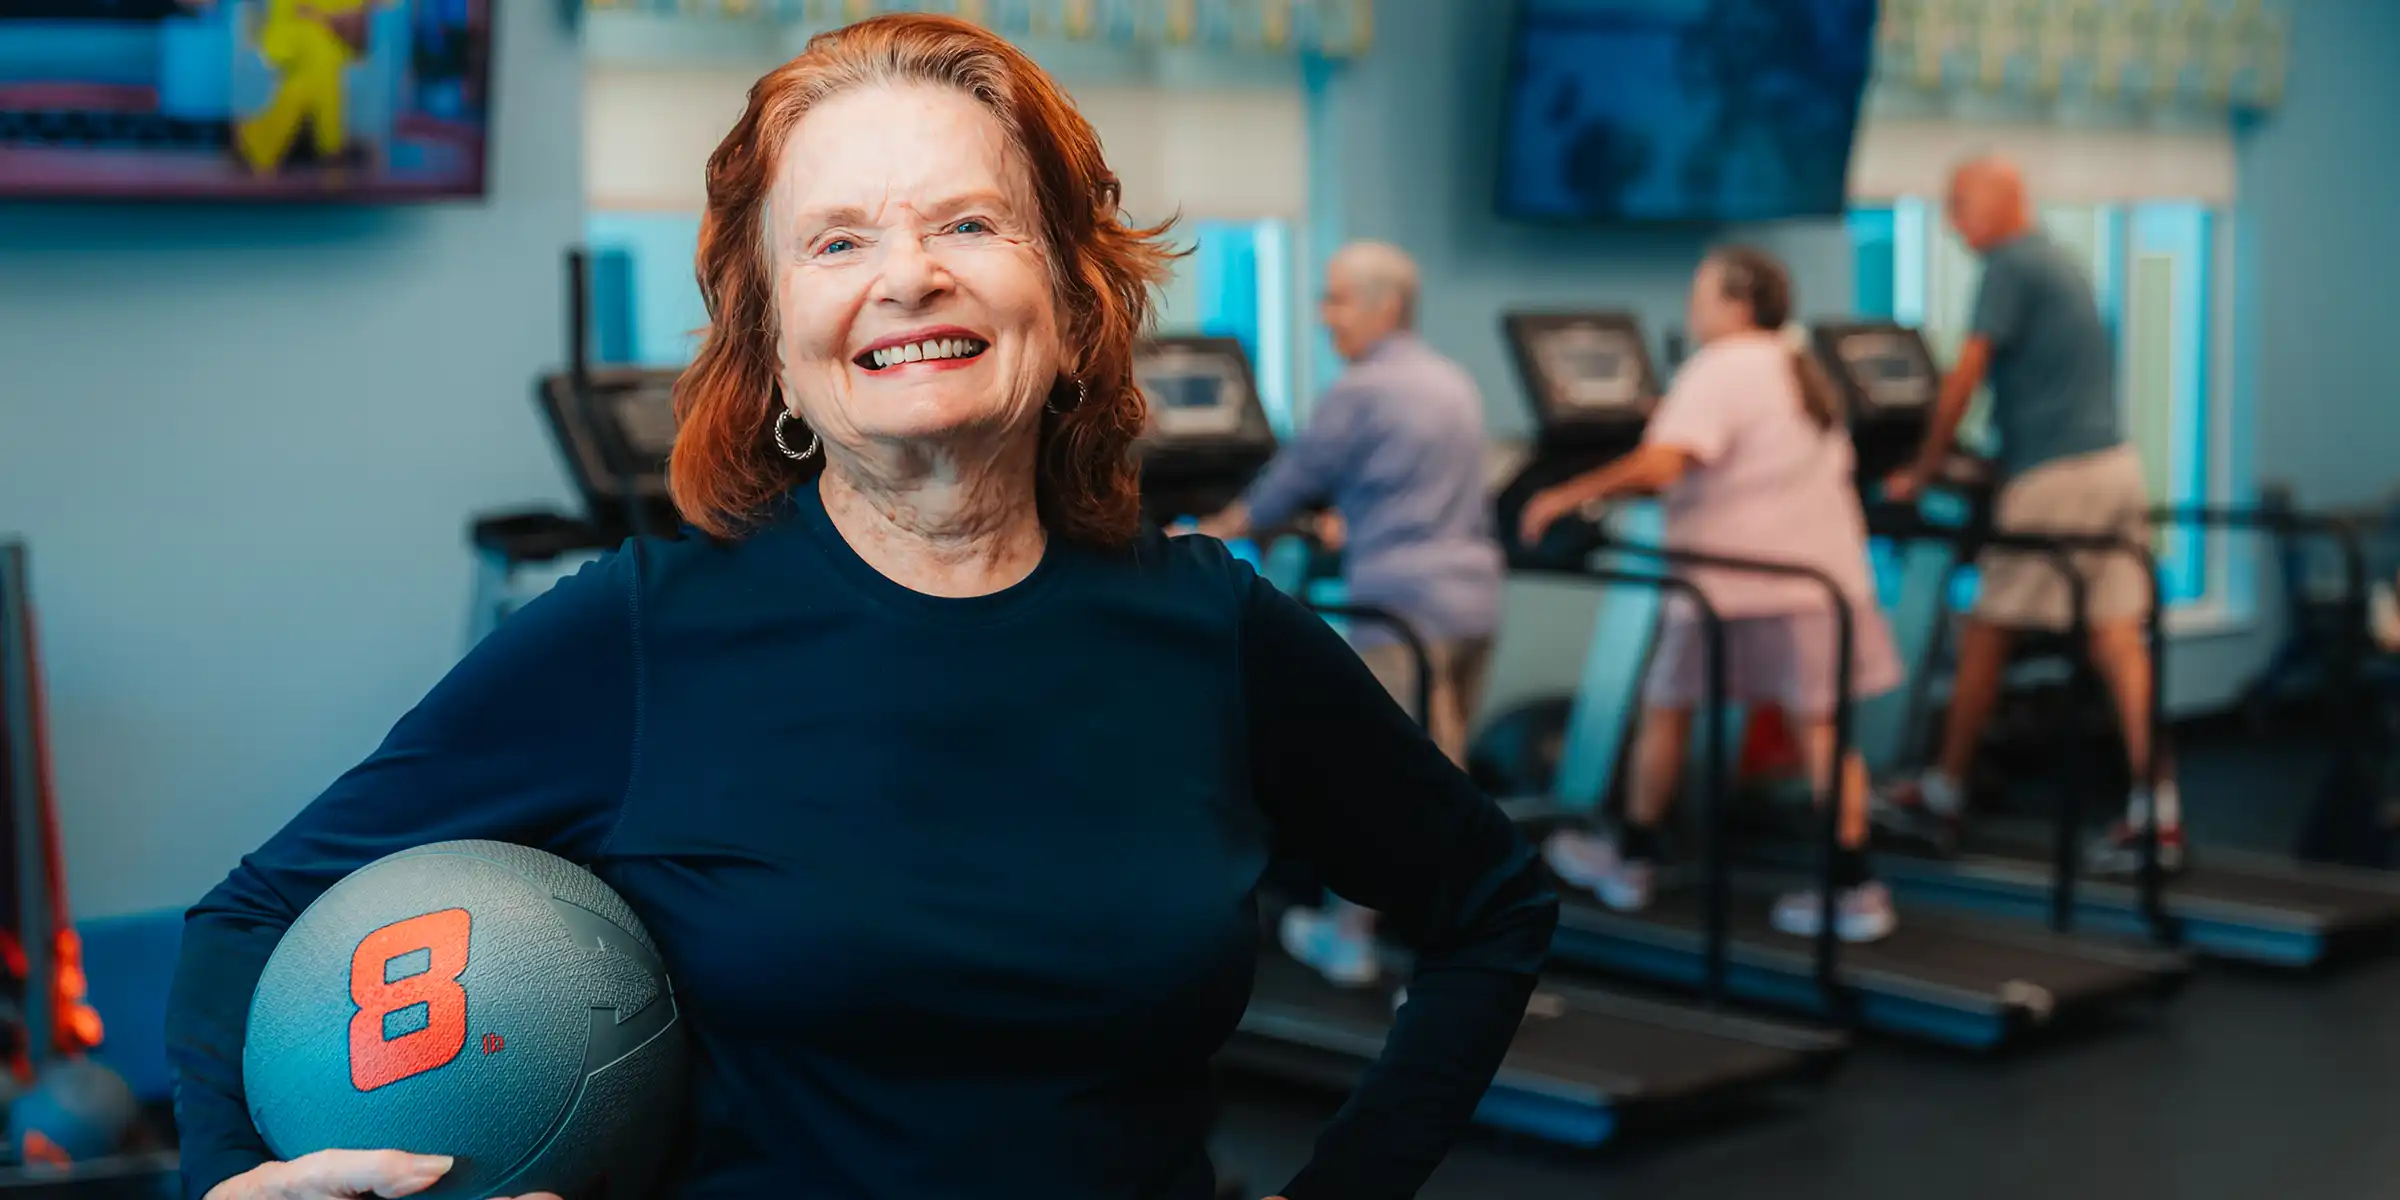 A senior woman poses with a weighted medicine ball in a wellness gym